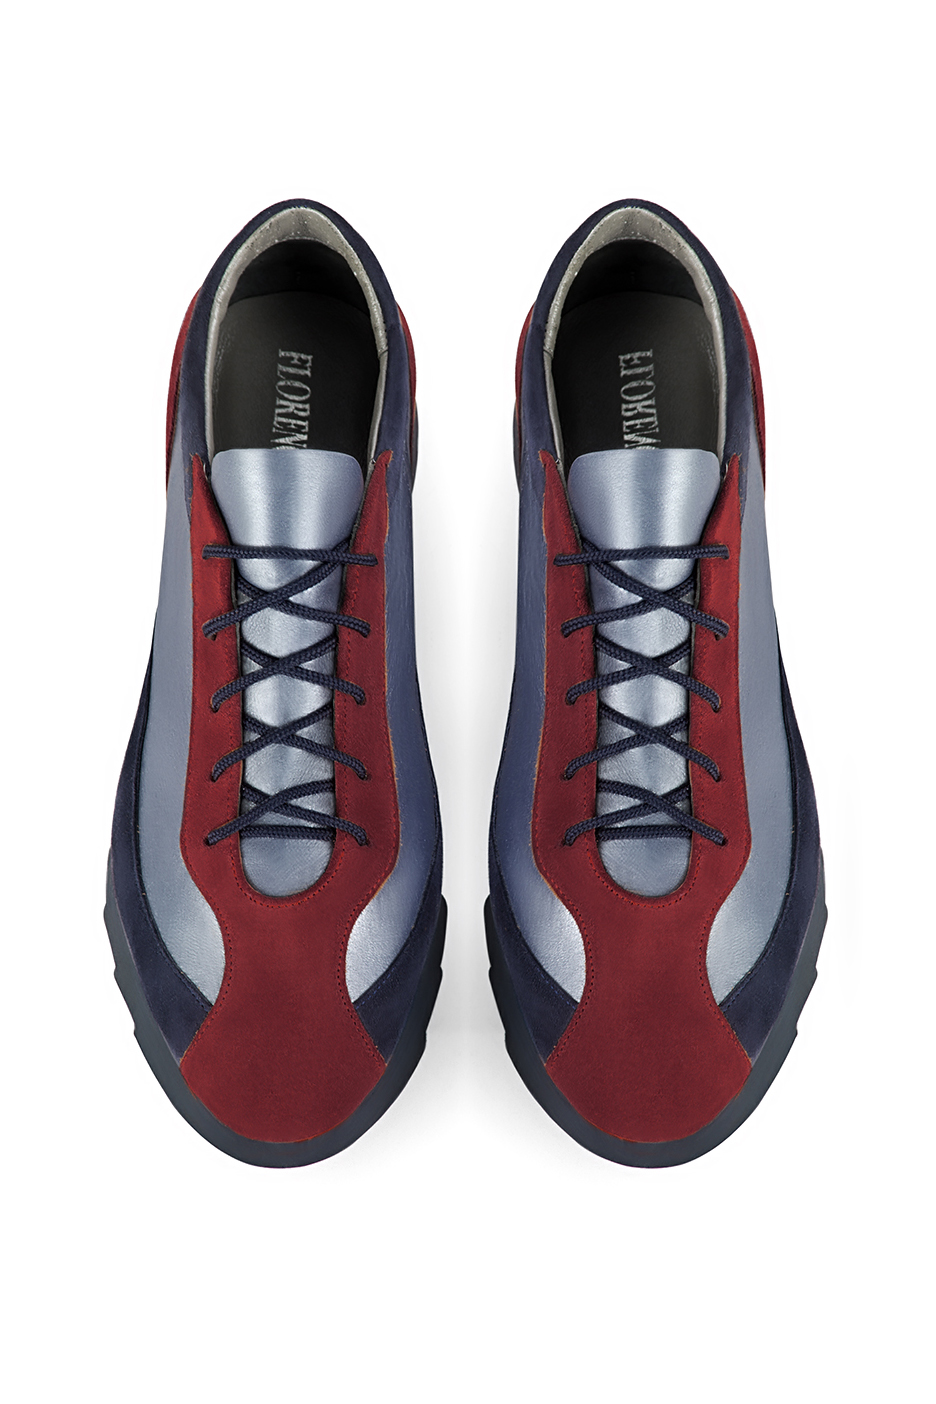 Burgundy red and denim blue women's three-tone elegant sneakers. Round toe. Low rubber soles. Top view - Florence KOOIJMAN